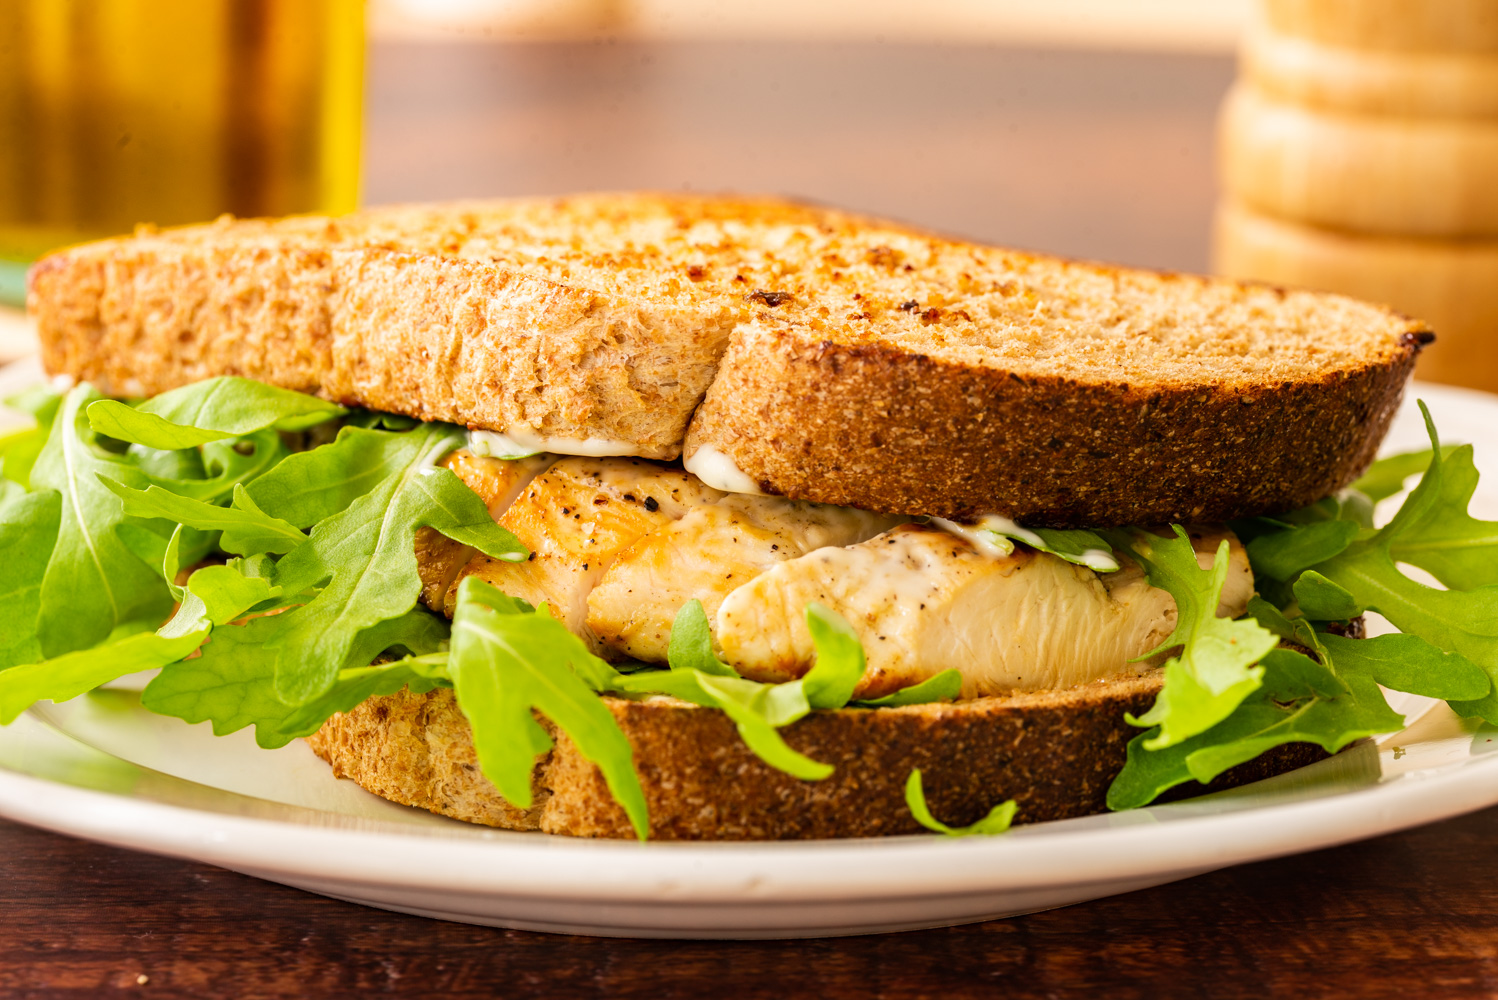 grilled chicken breast sandwich with watercress on a white plate